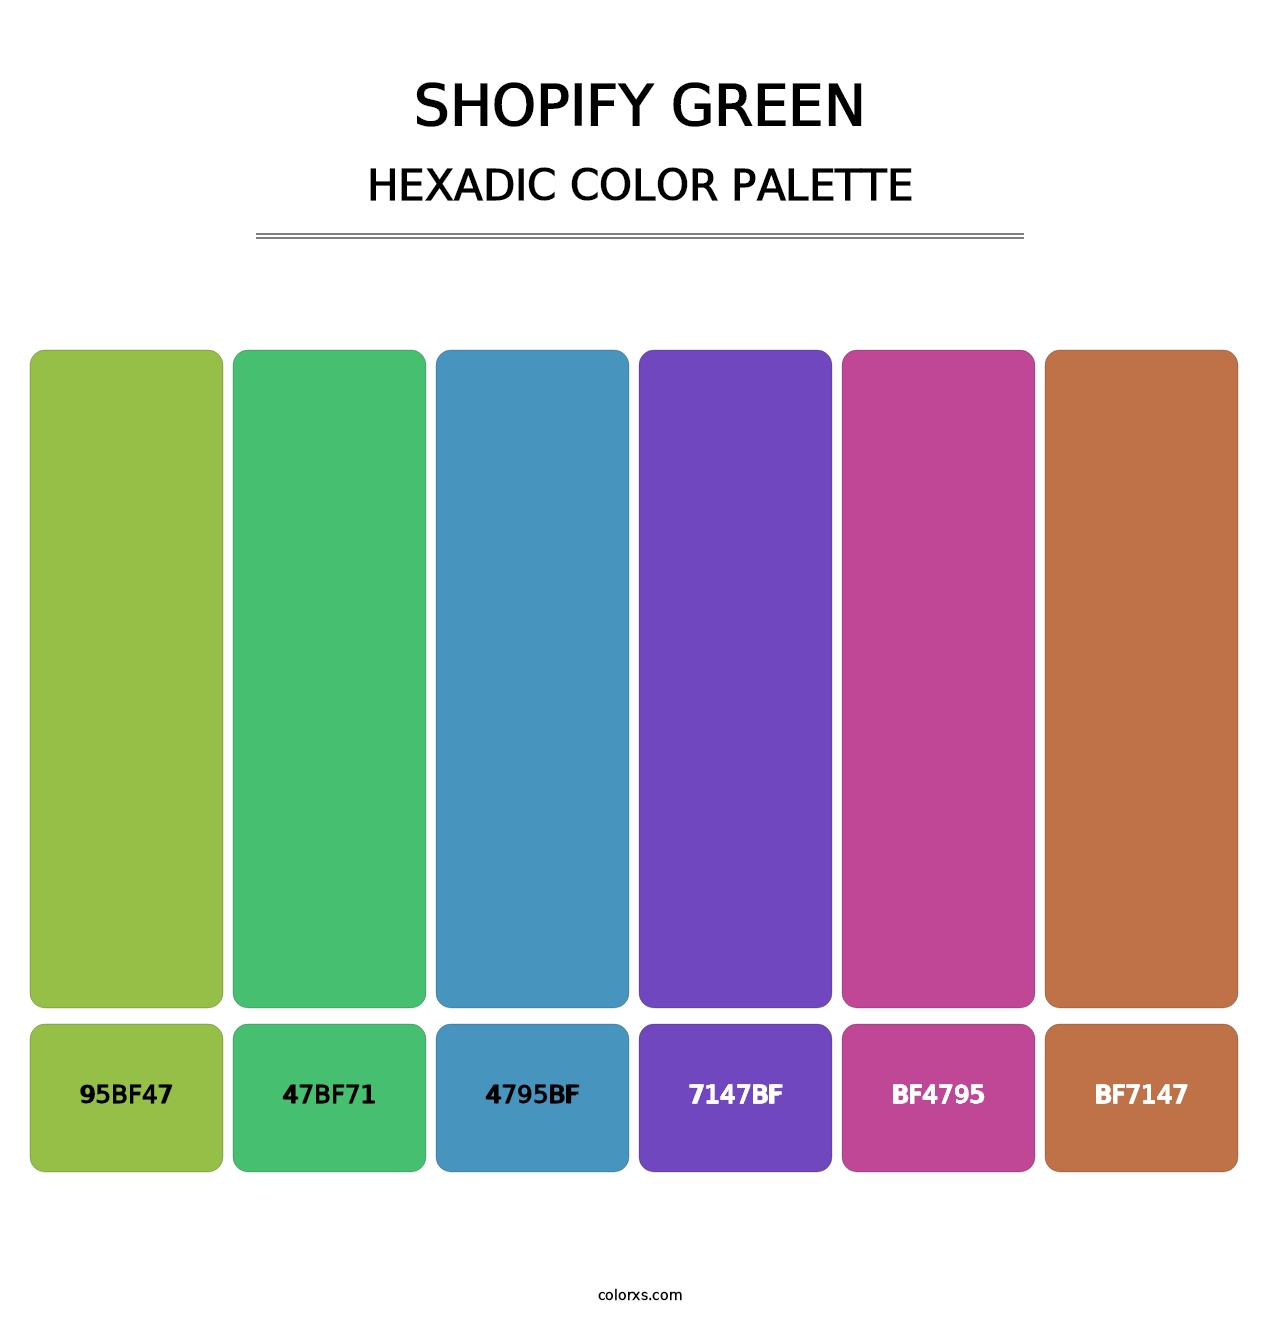 Shopify Green - Hexadic Color Palette